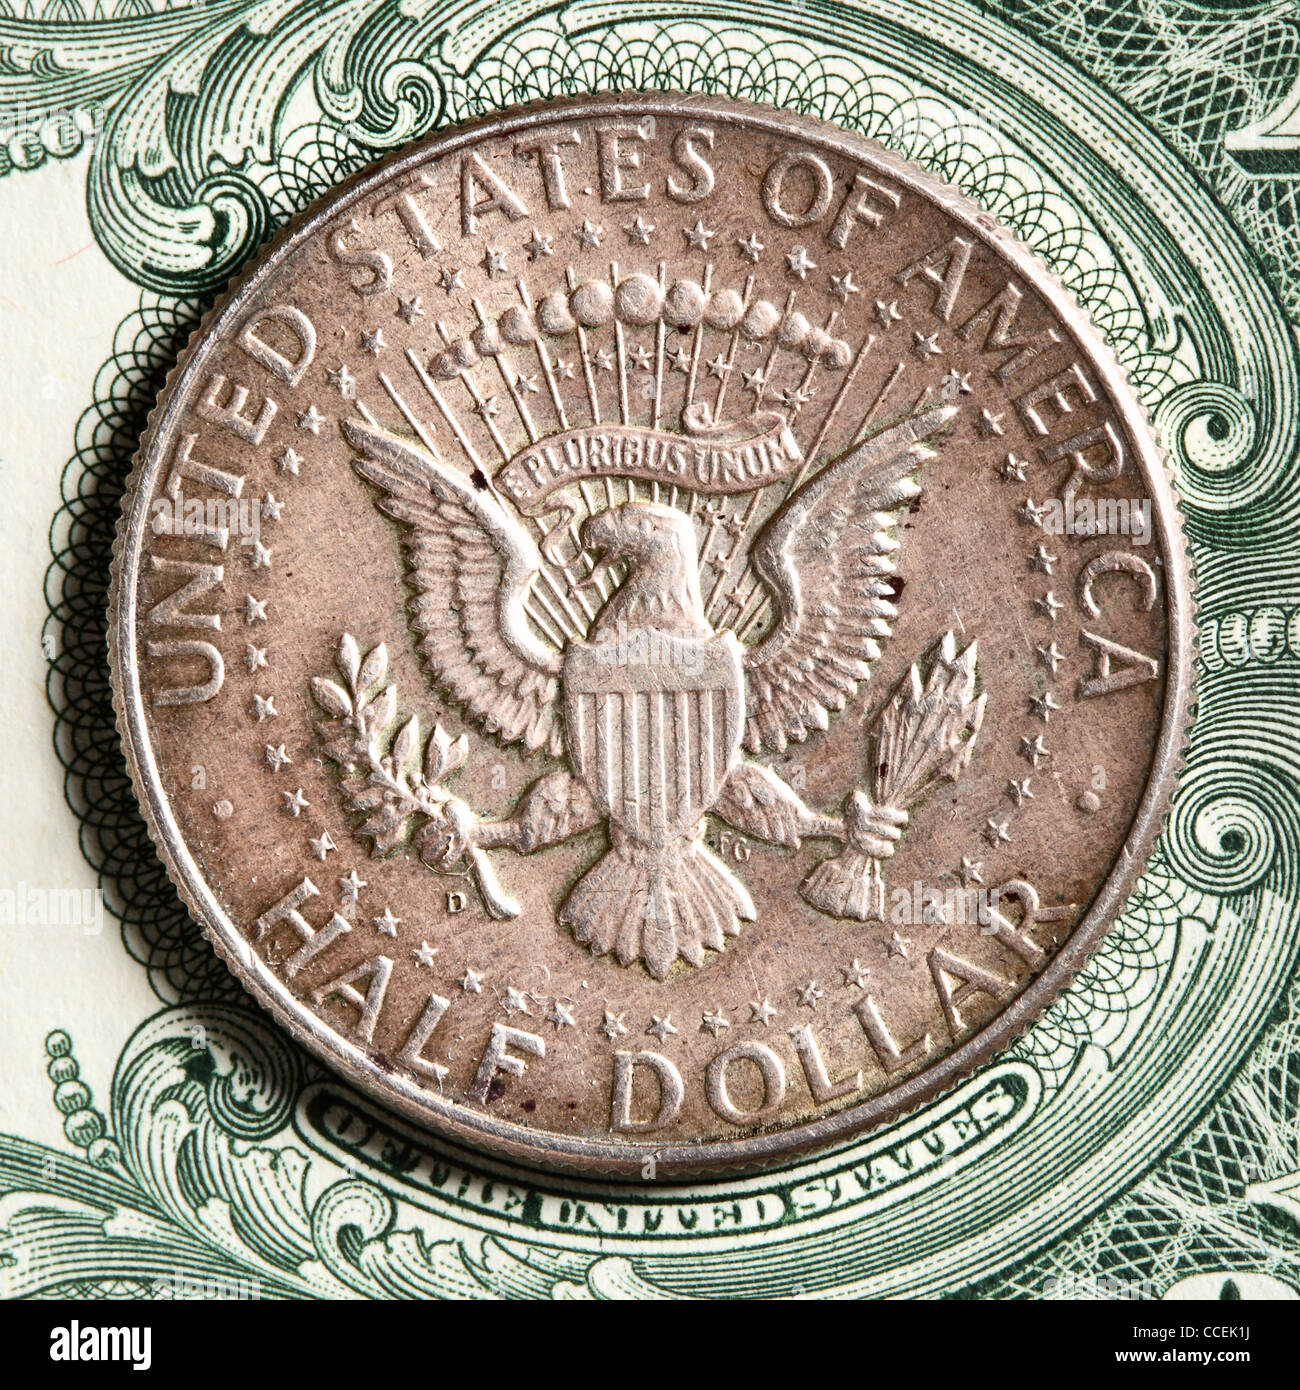 Half dollar coin close up on banknote Stock Photo